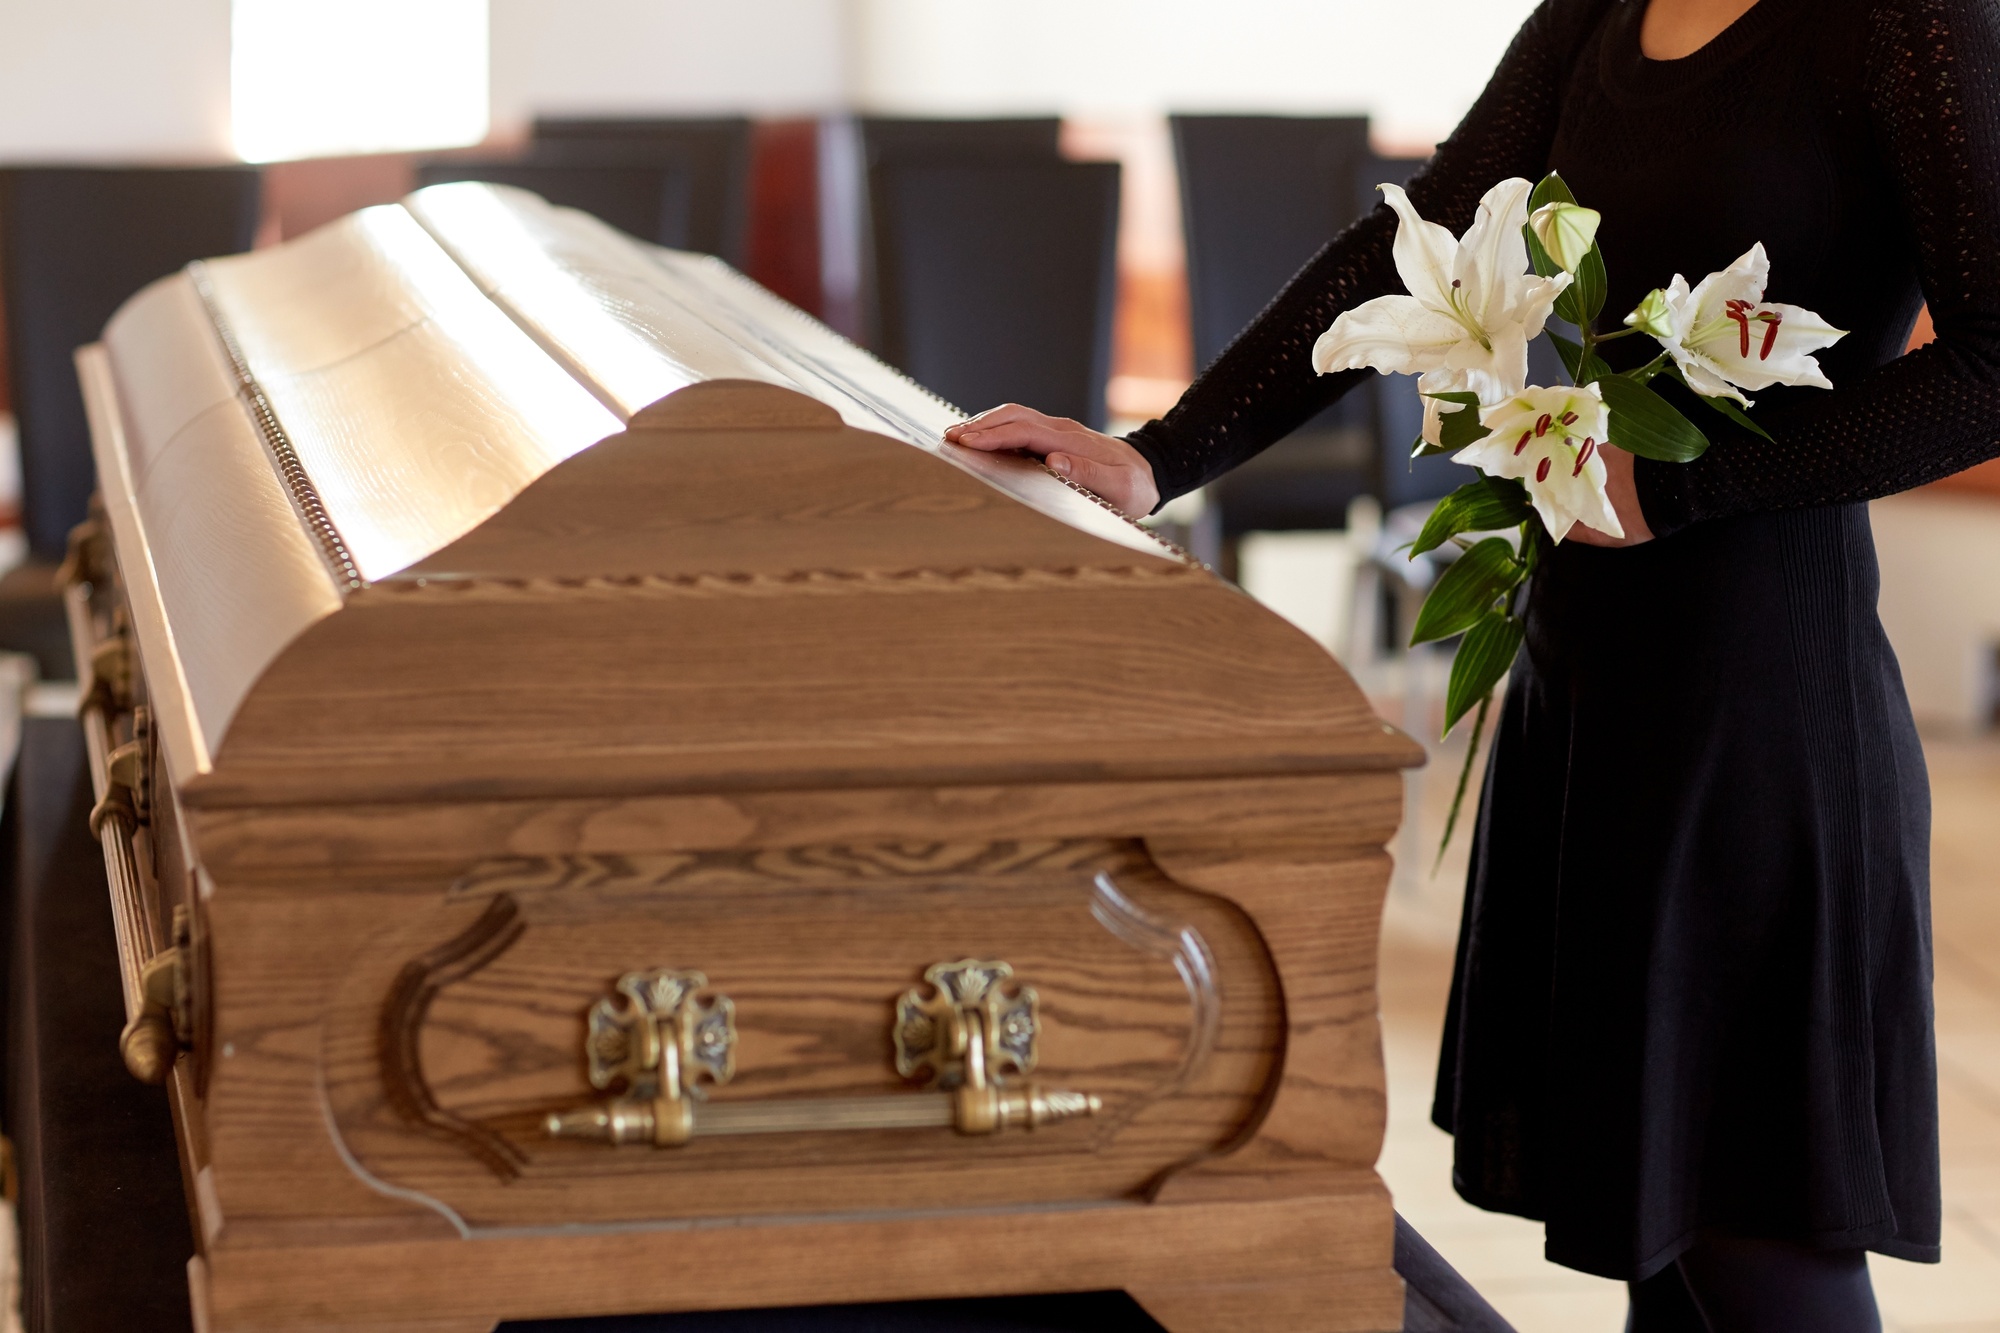 Planning for the Inevitable: 4 Tips to Prepare for Funeral Services